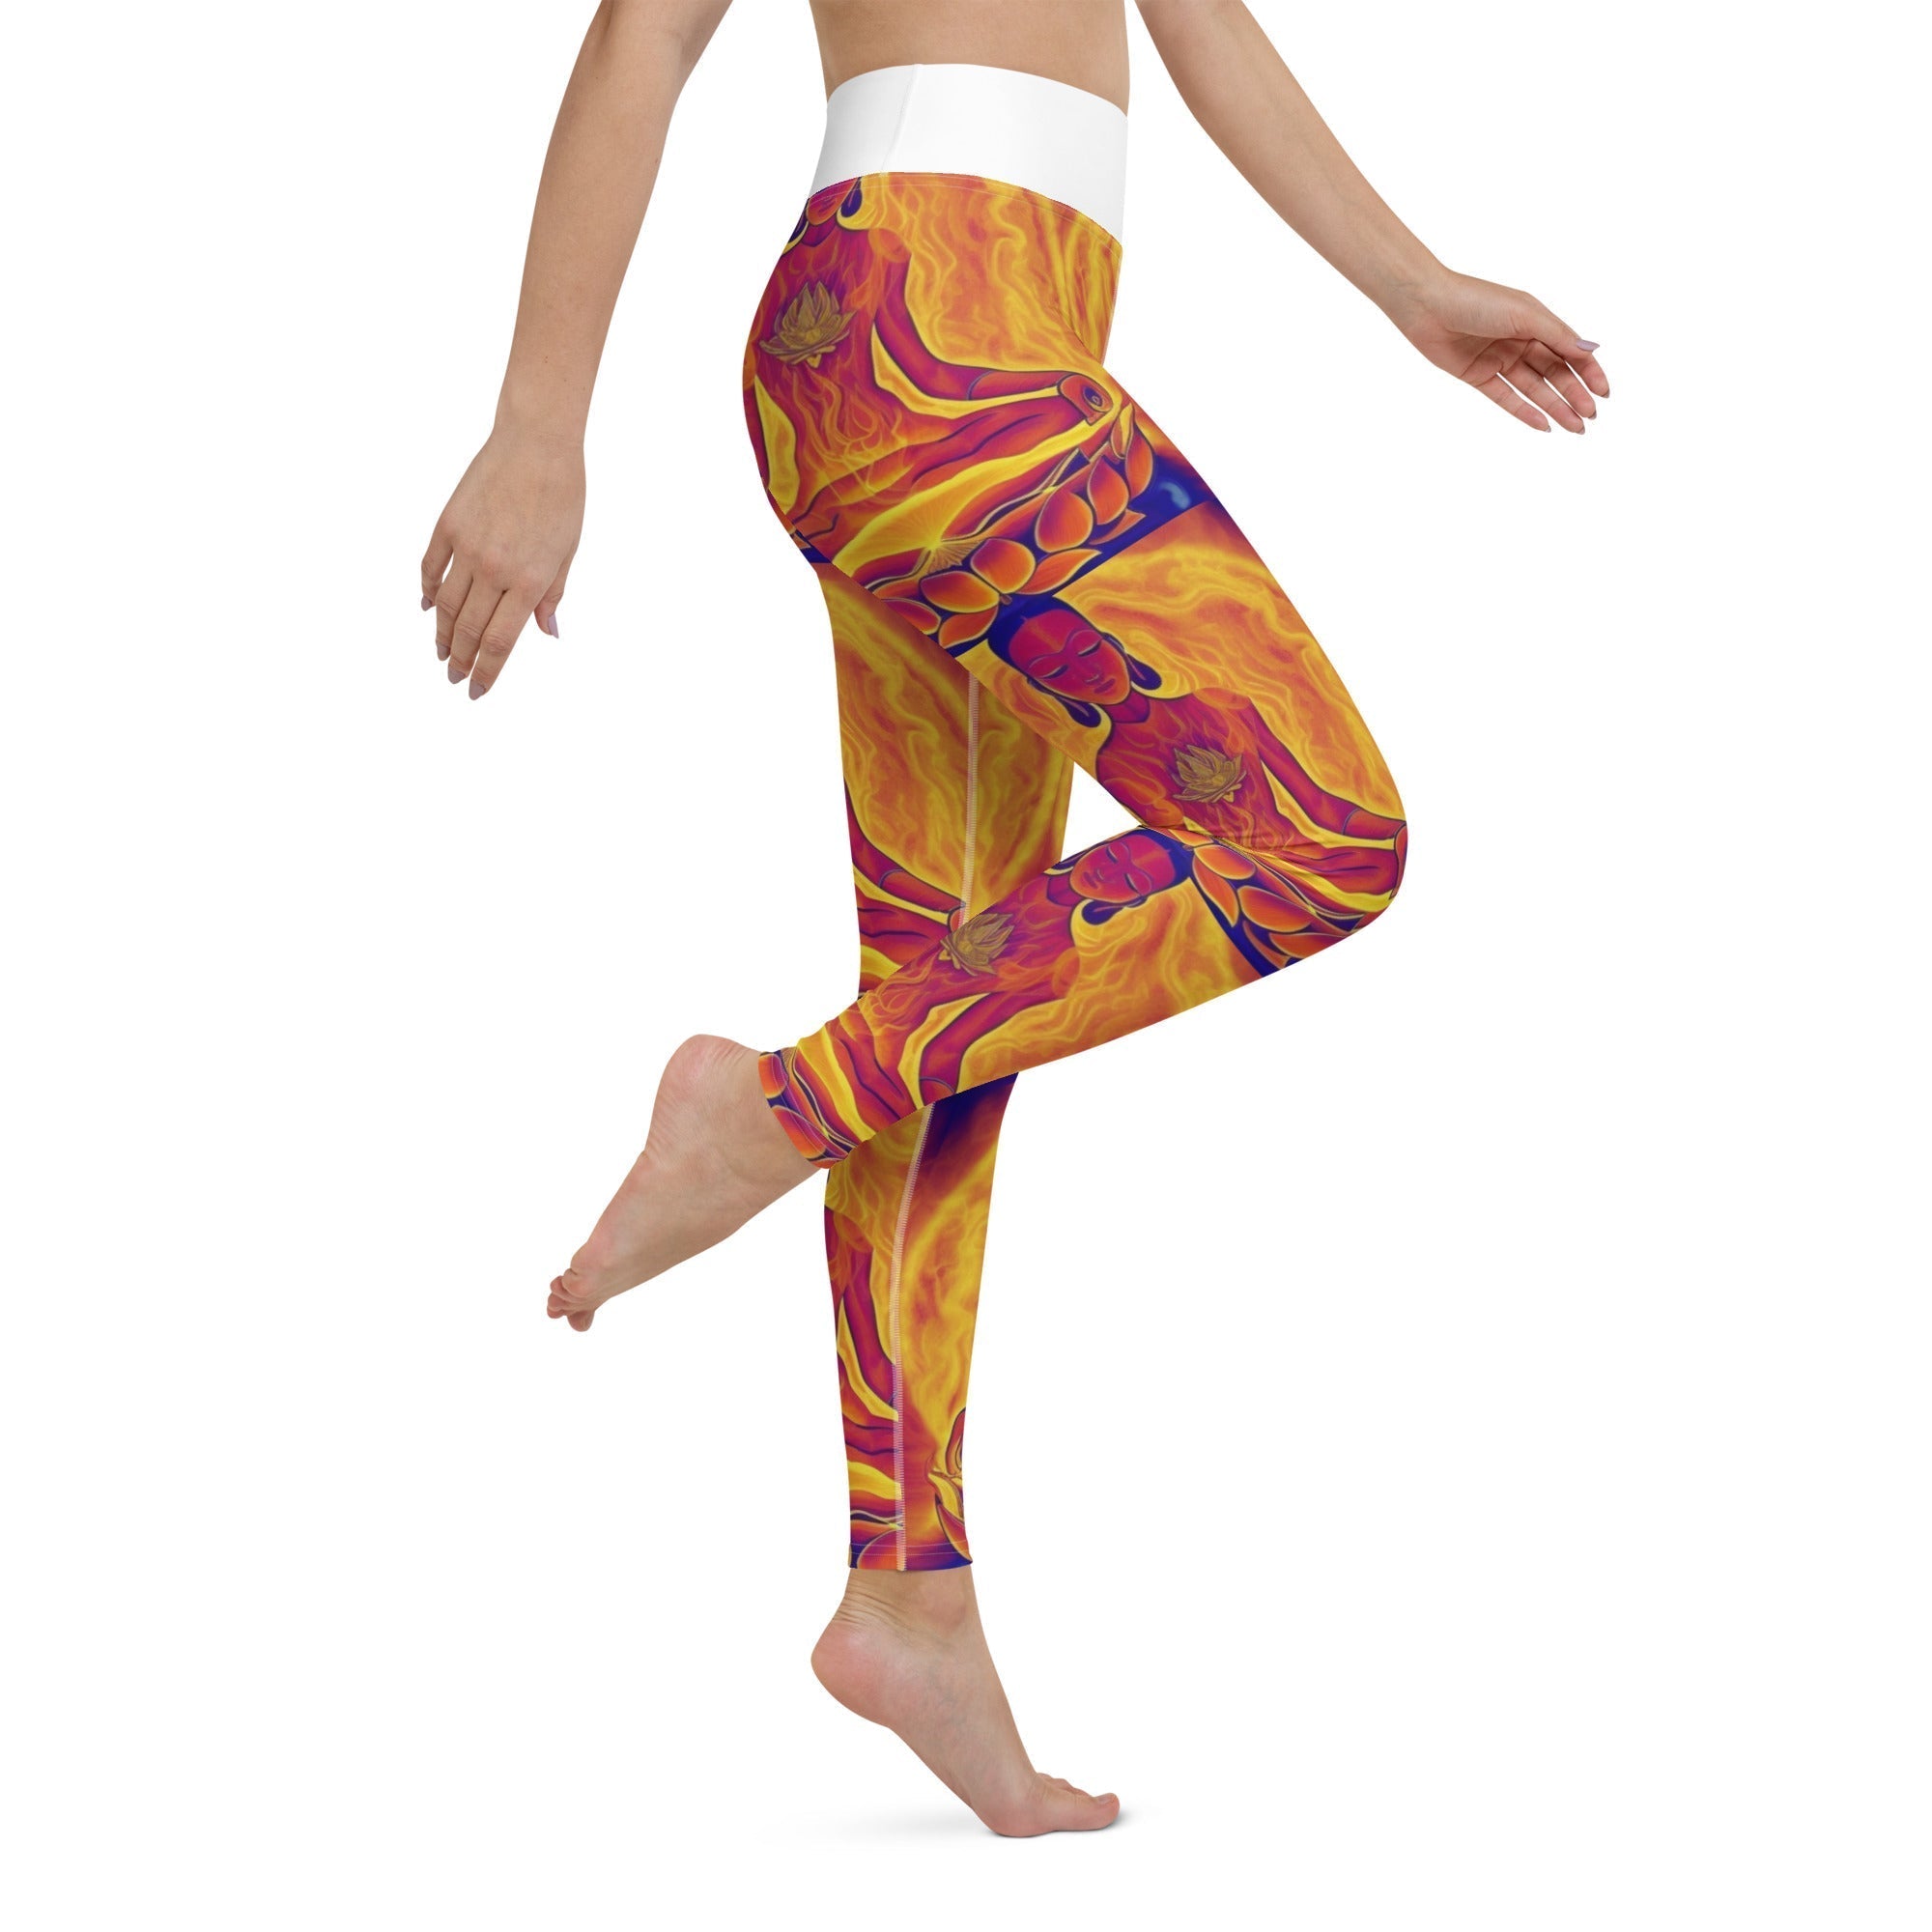 Indulge in Love with Guy Christopher's Yoga Leggings - Embrace Mesmerizing Comfort for Your Body and Soul - Guy Christopher